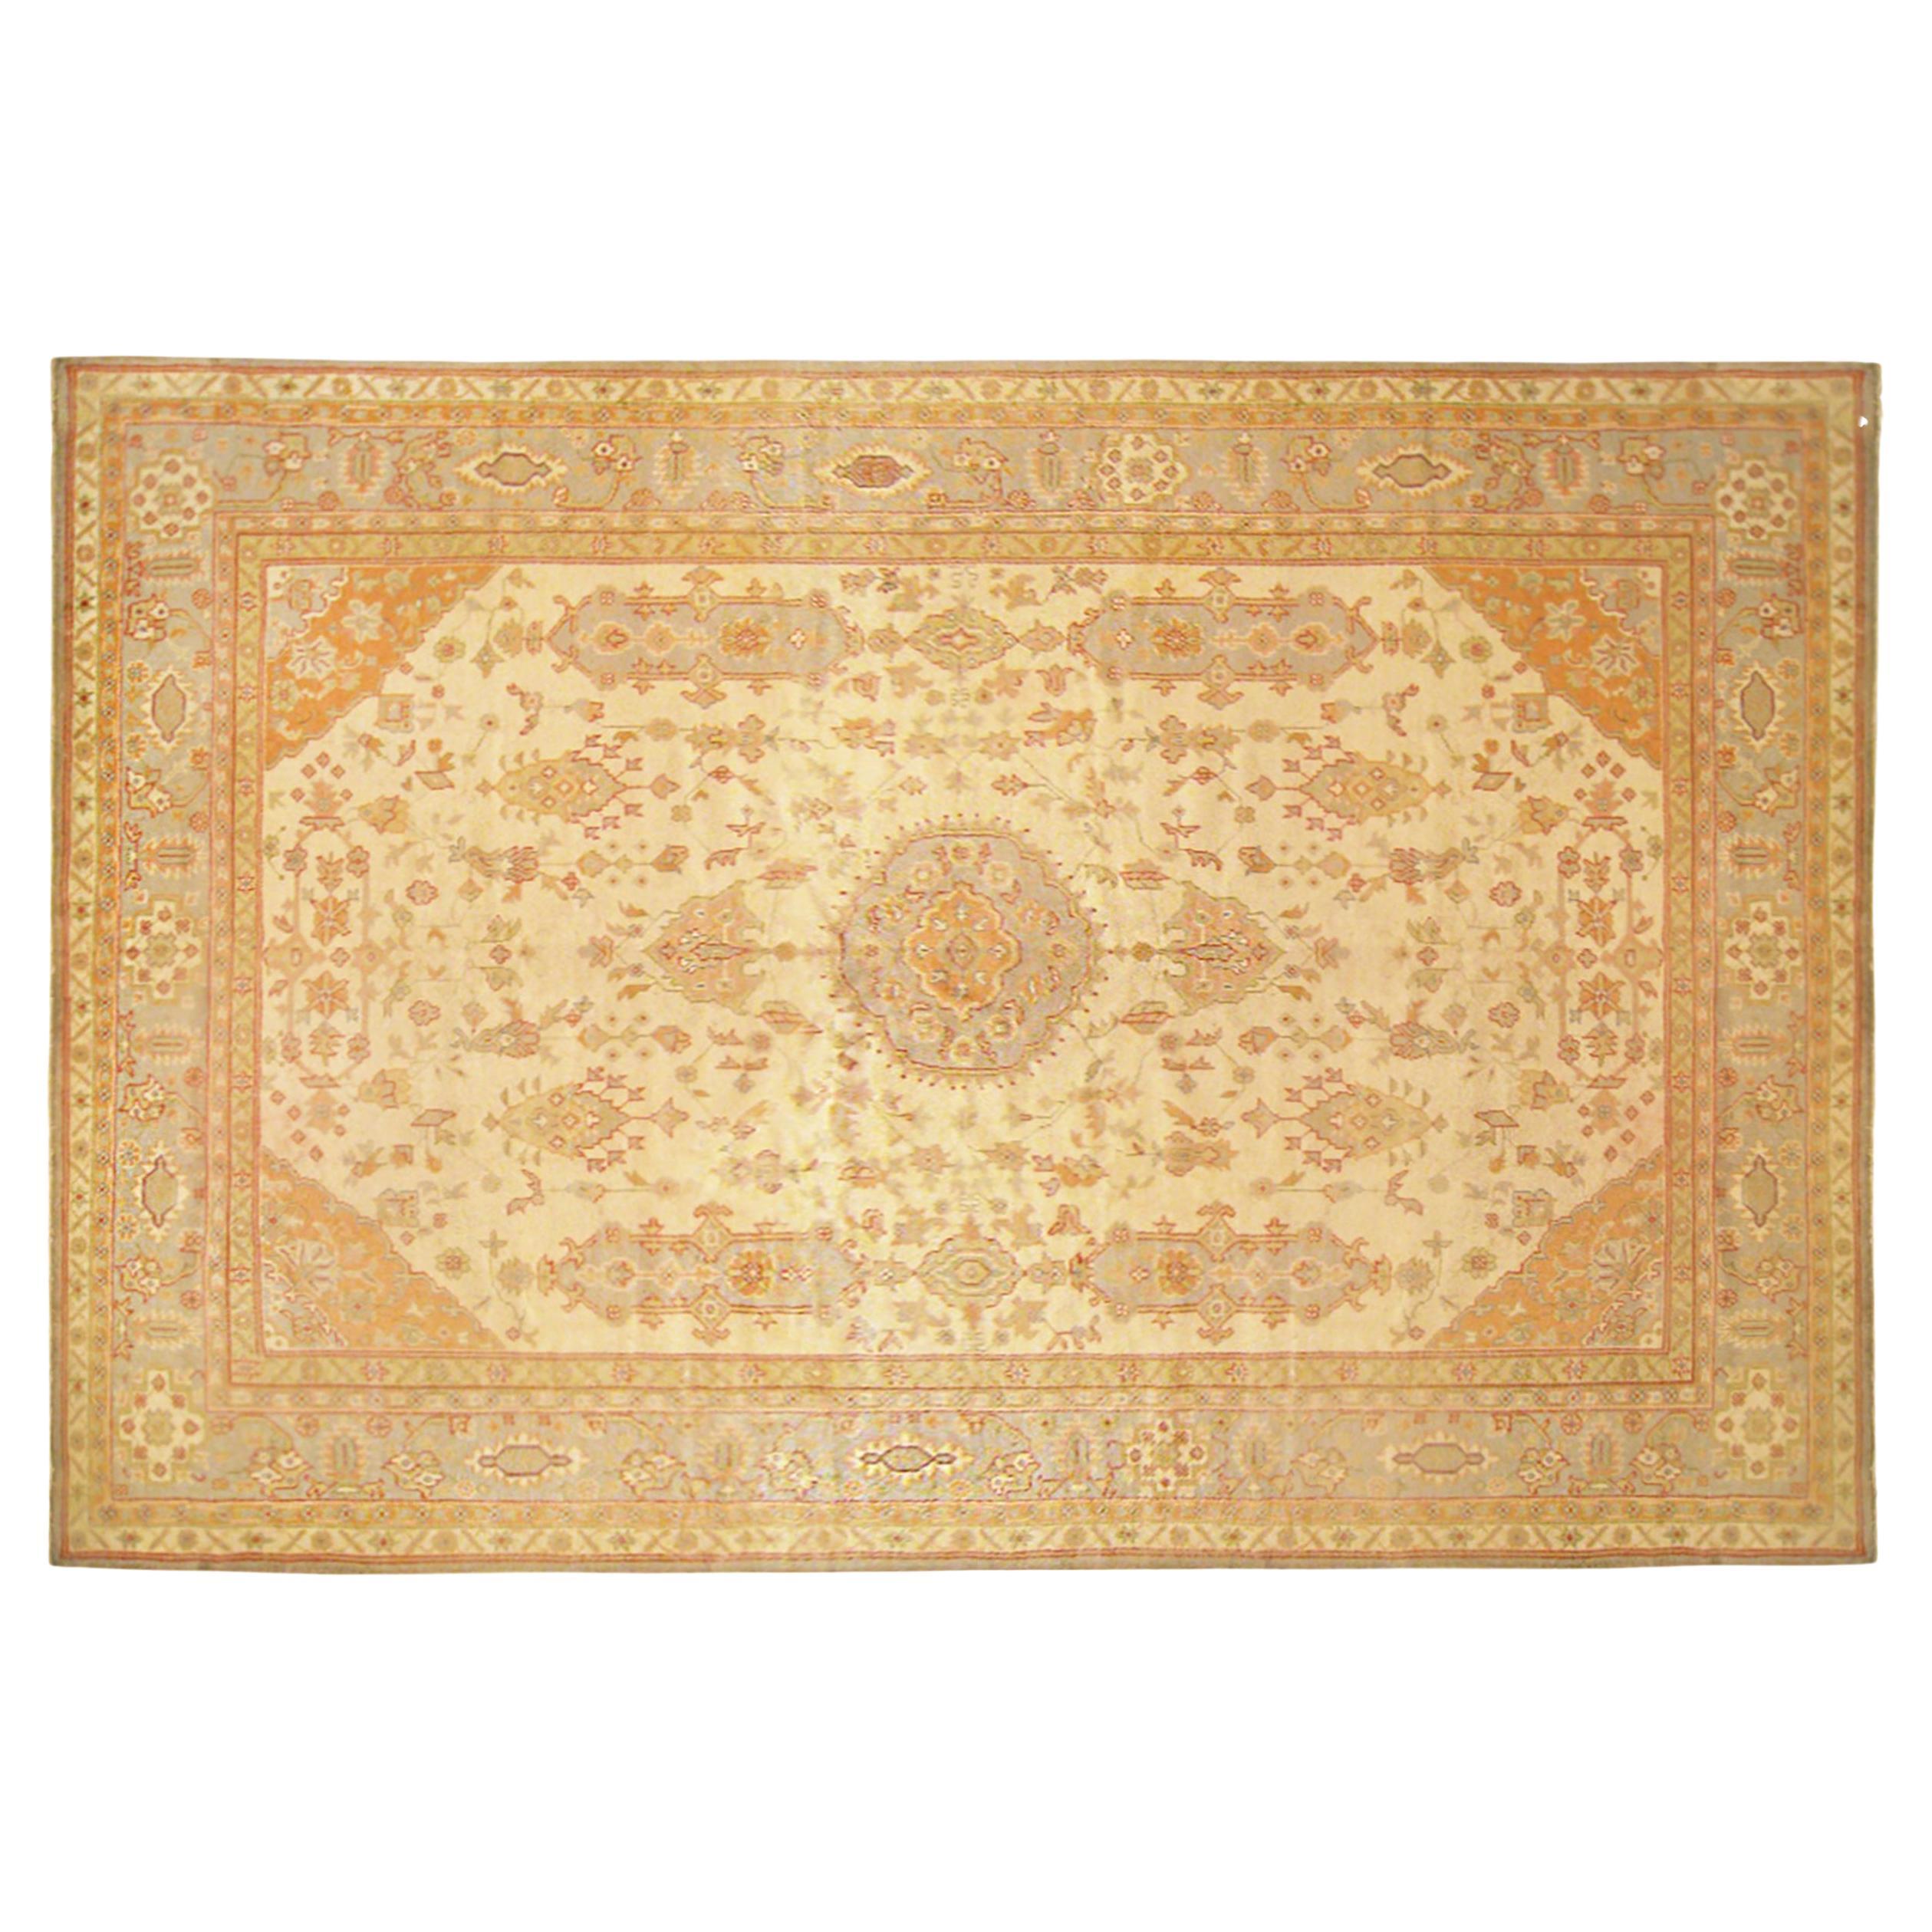 Antique Turkish Decorative Oriental Oushak Rug in Room Size For Sale